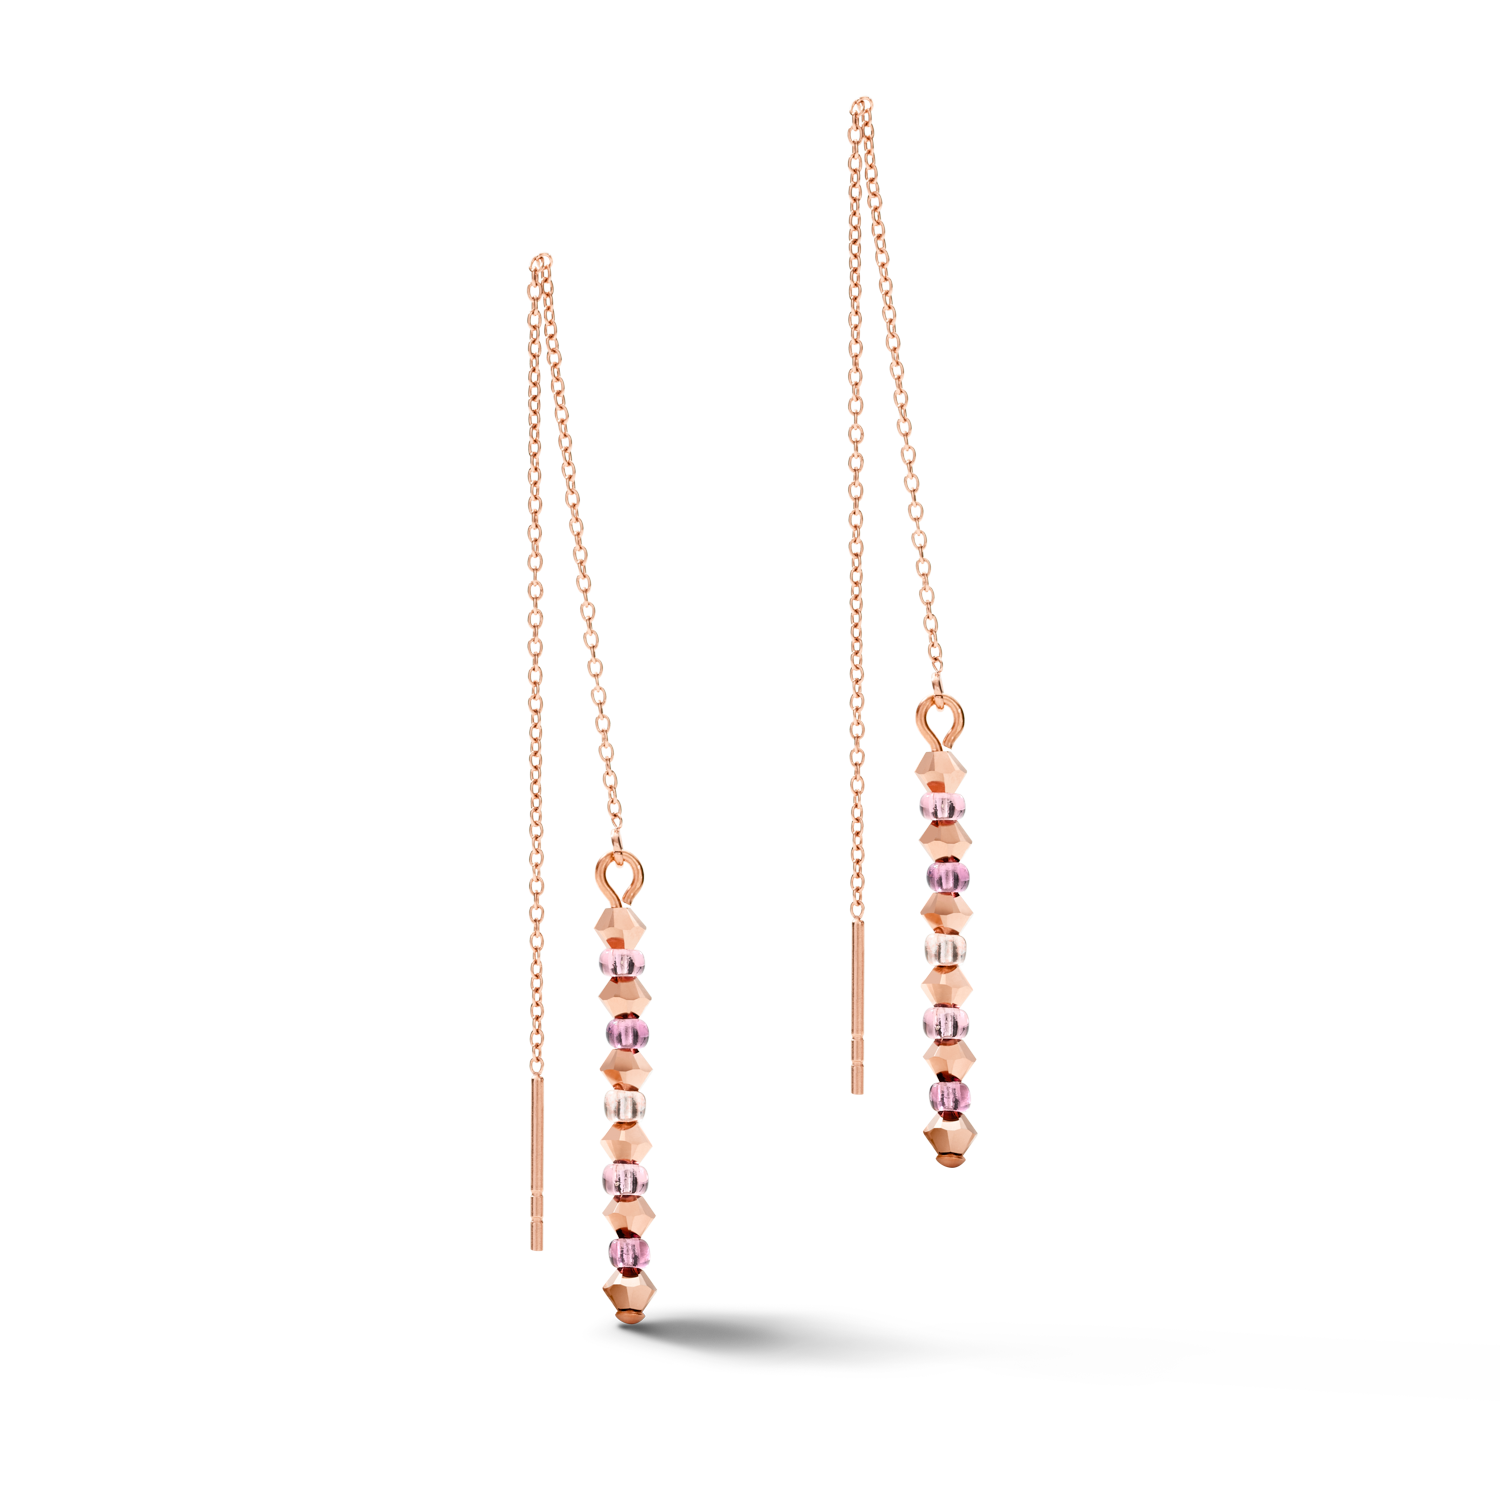 Earrings 2-layers fine crystals & stainless steel rose gold lilac